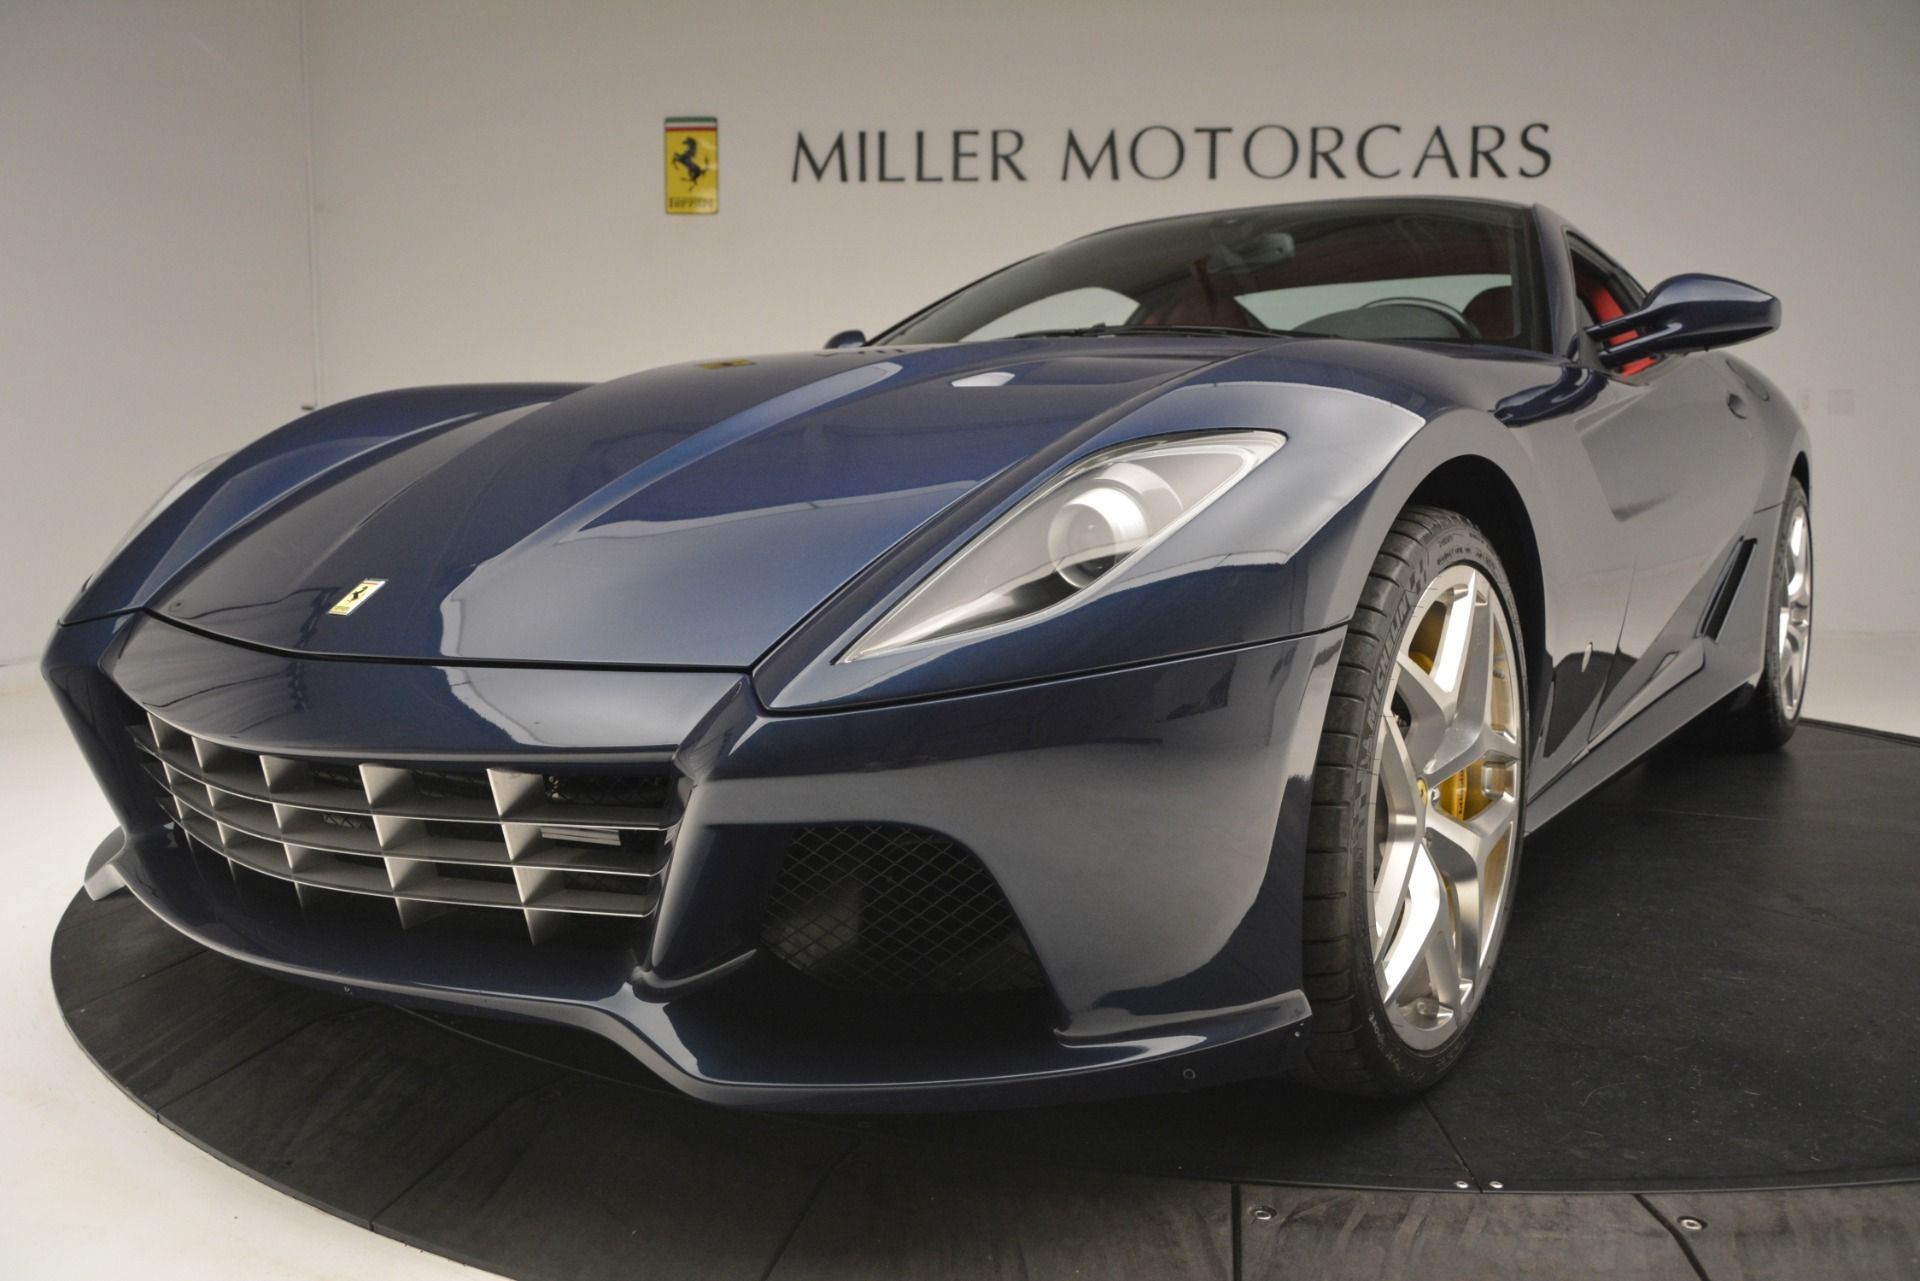 The Ferrari 599 GTB almost had this front